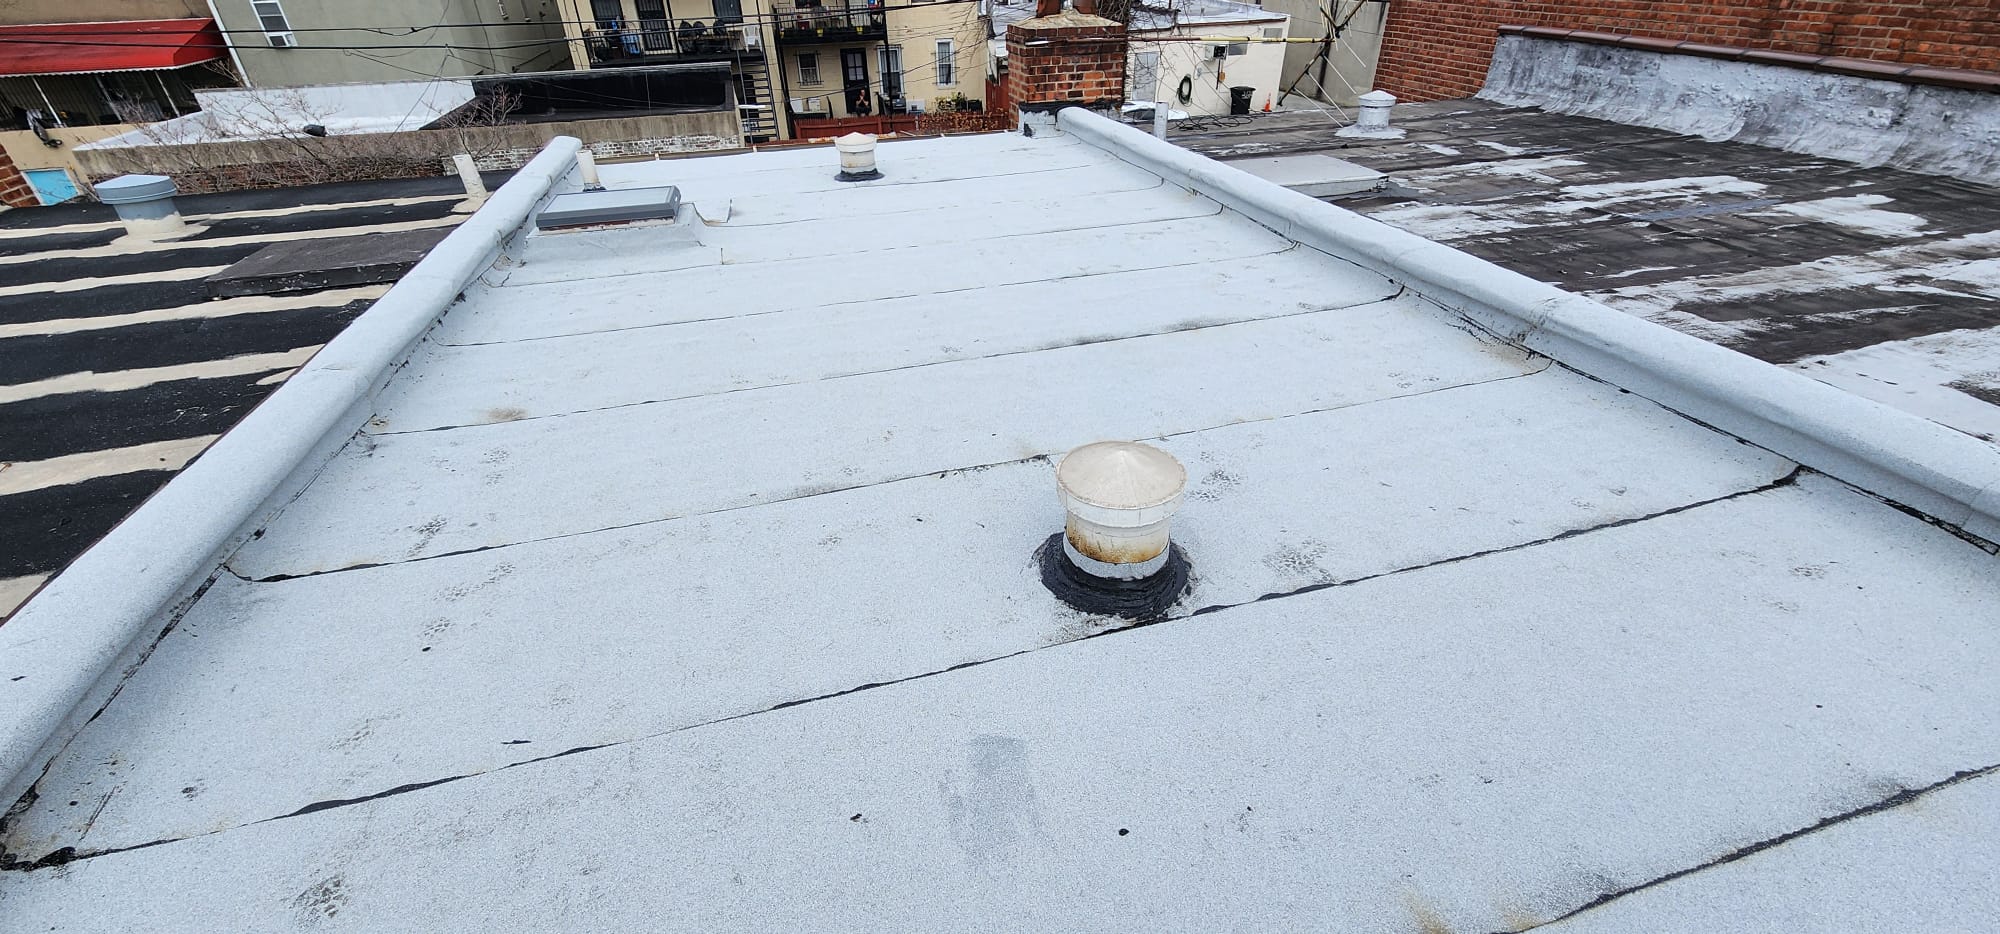 New Aluminum Flat Roof Installation in the Bronx NYC Project Shot 3